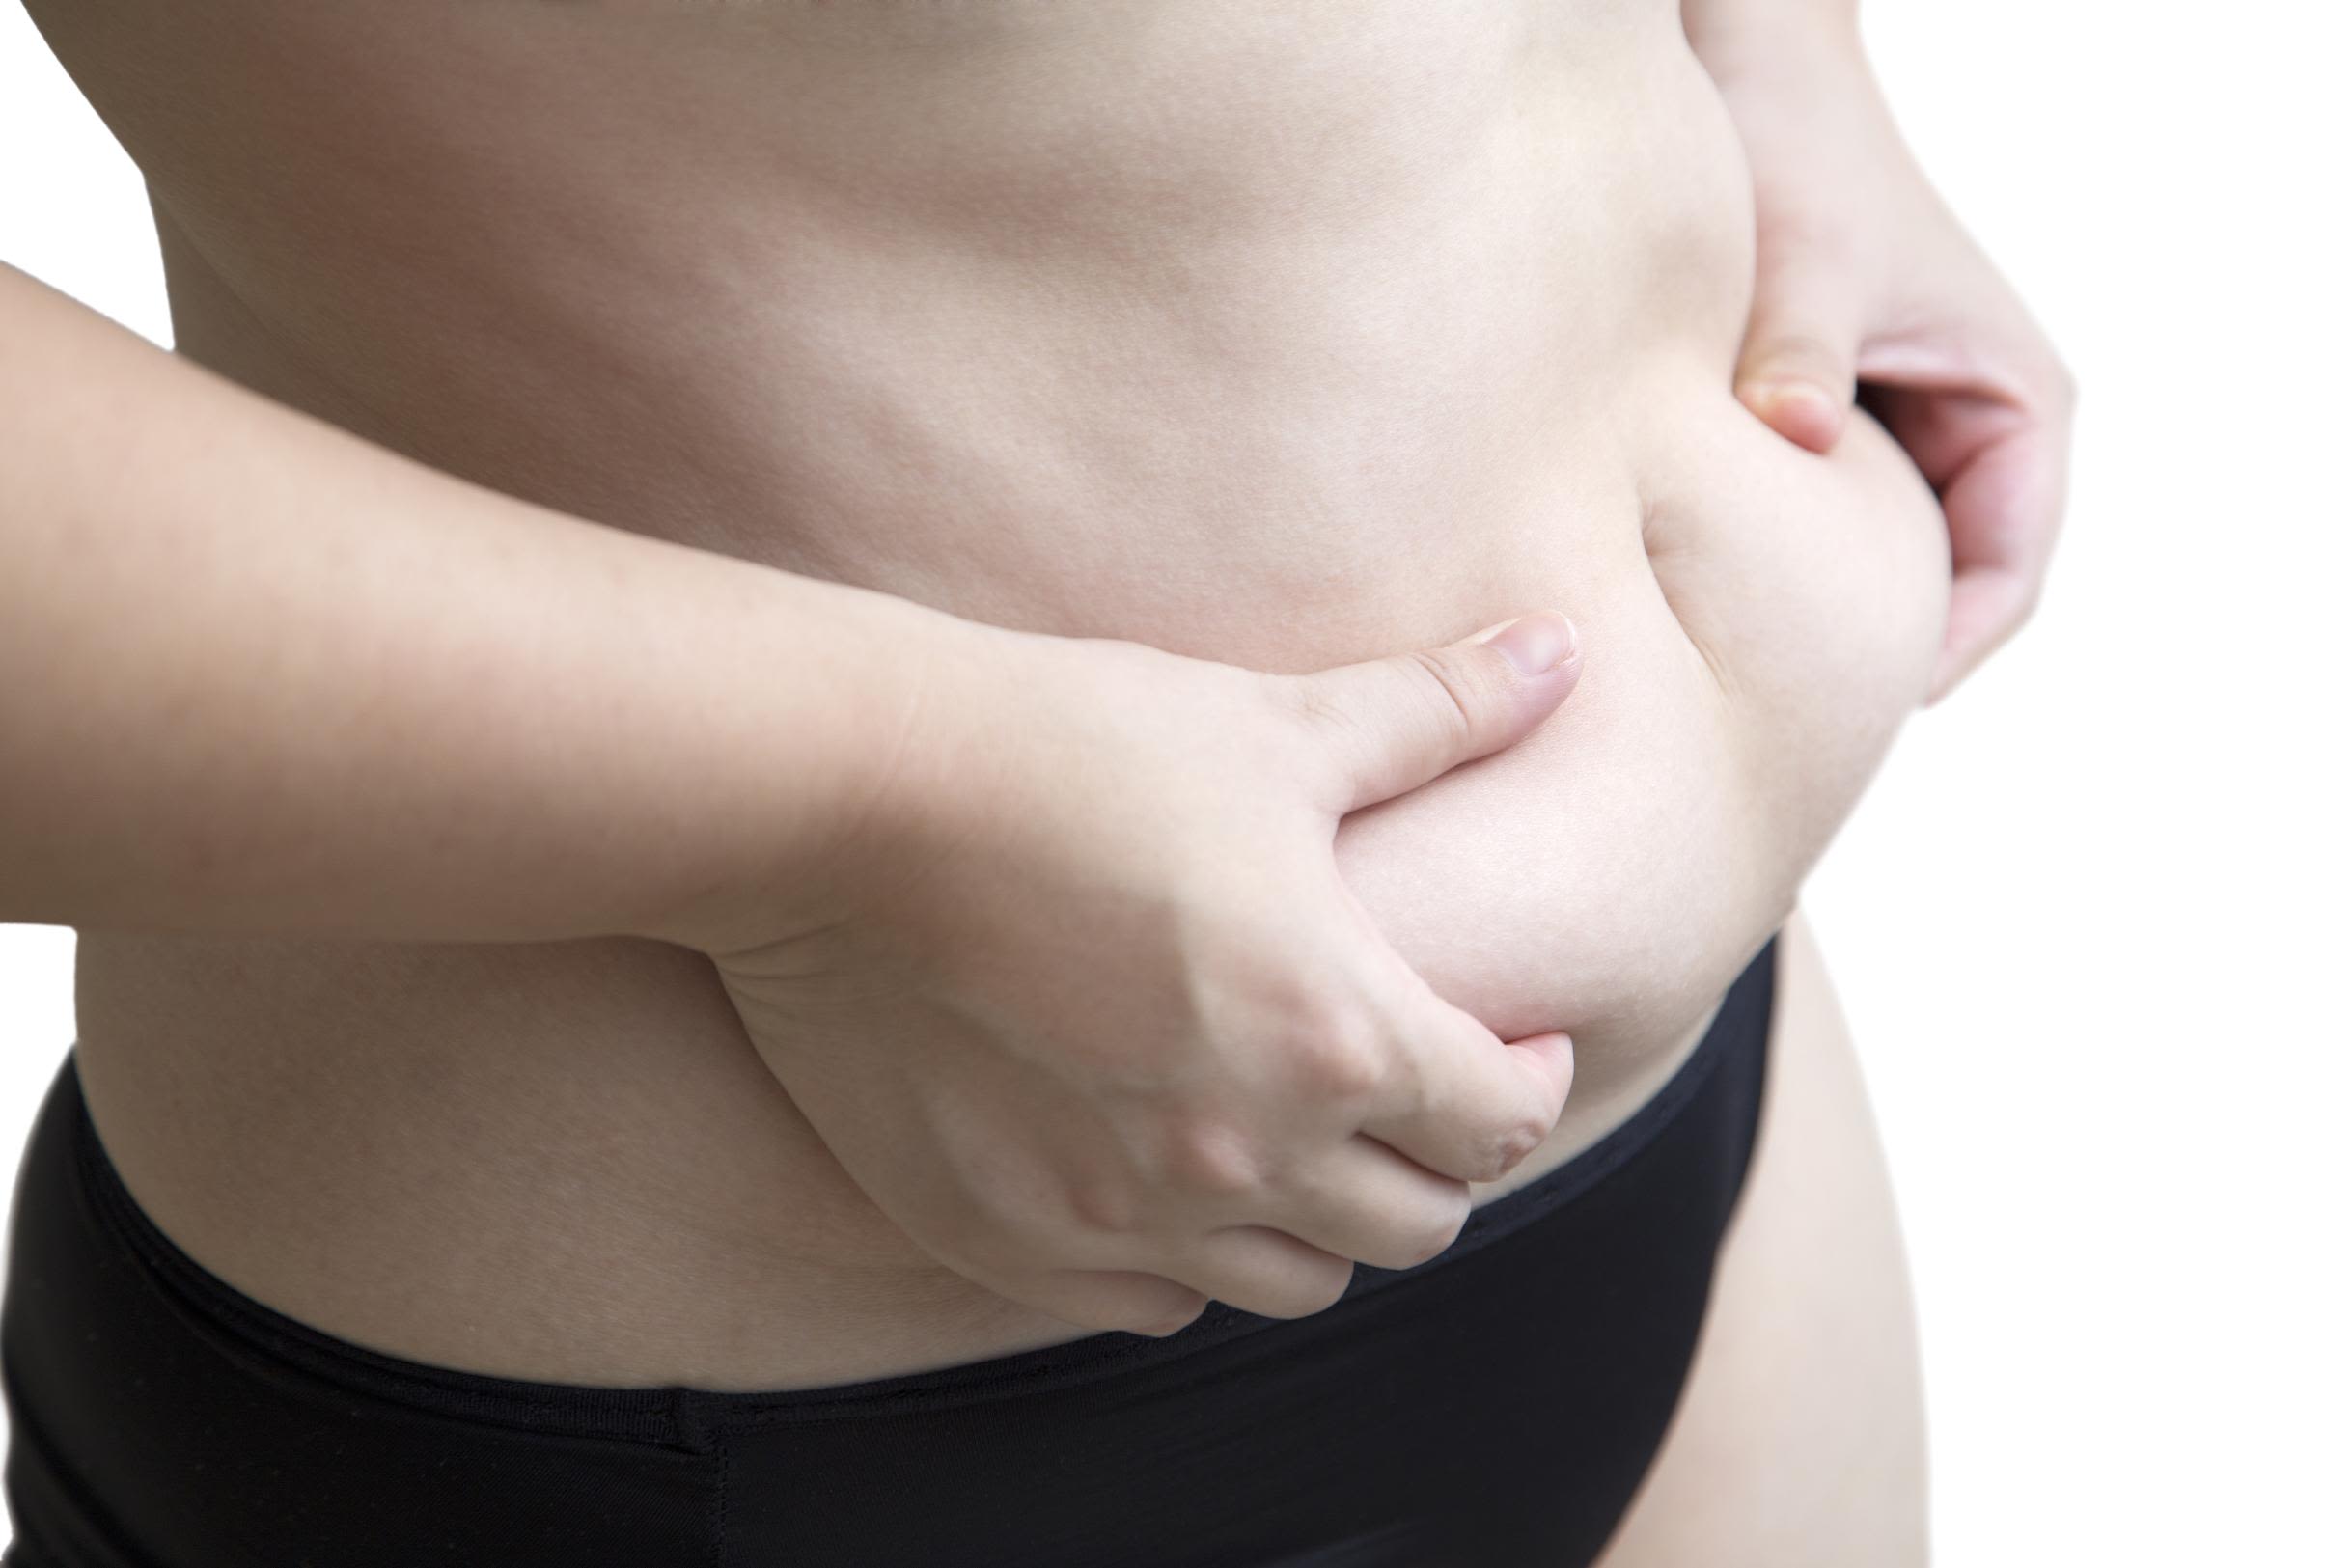 2437px x 1625px - Hormone replacement may fight belly fat, study says | CNN